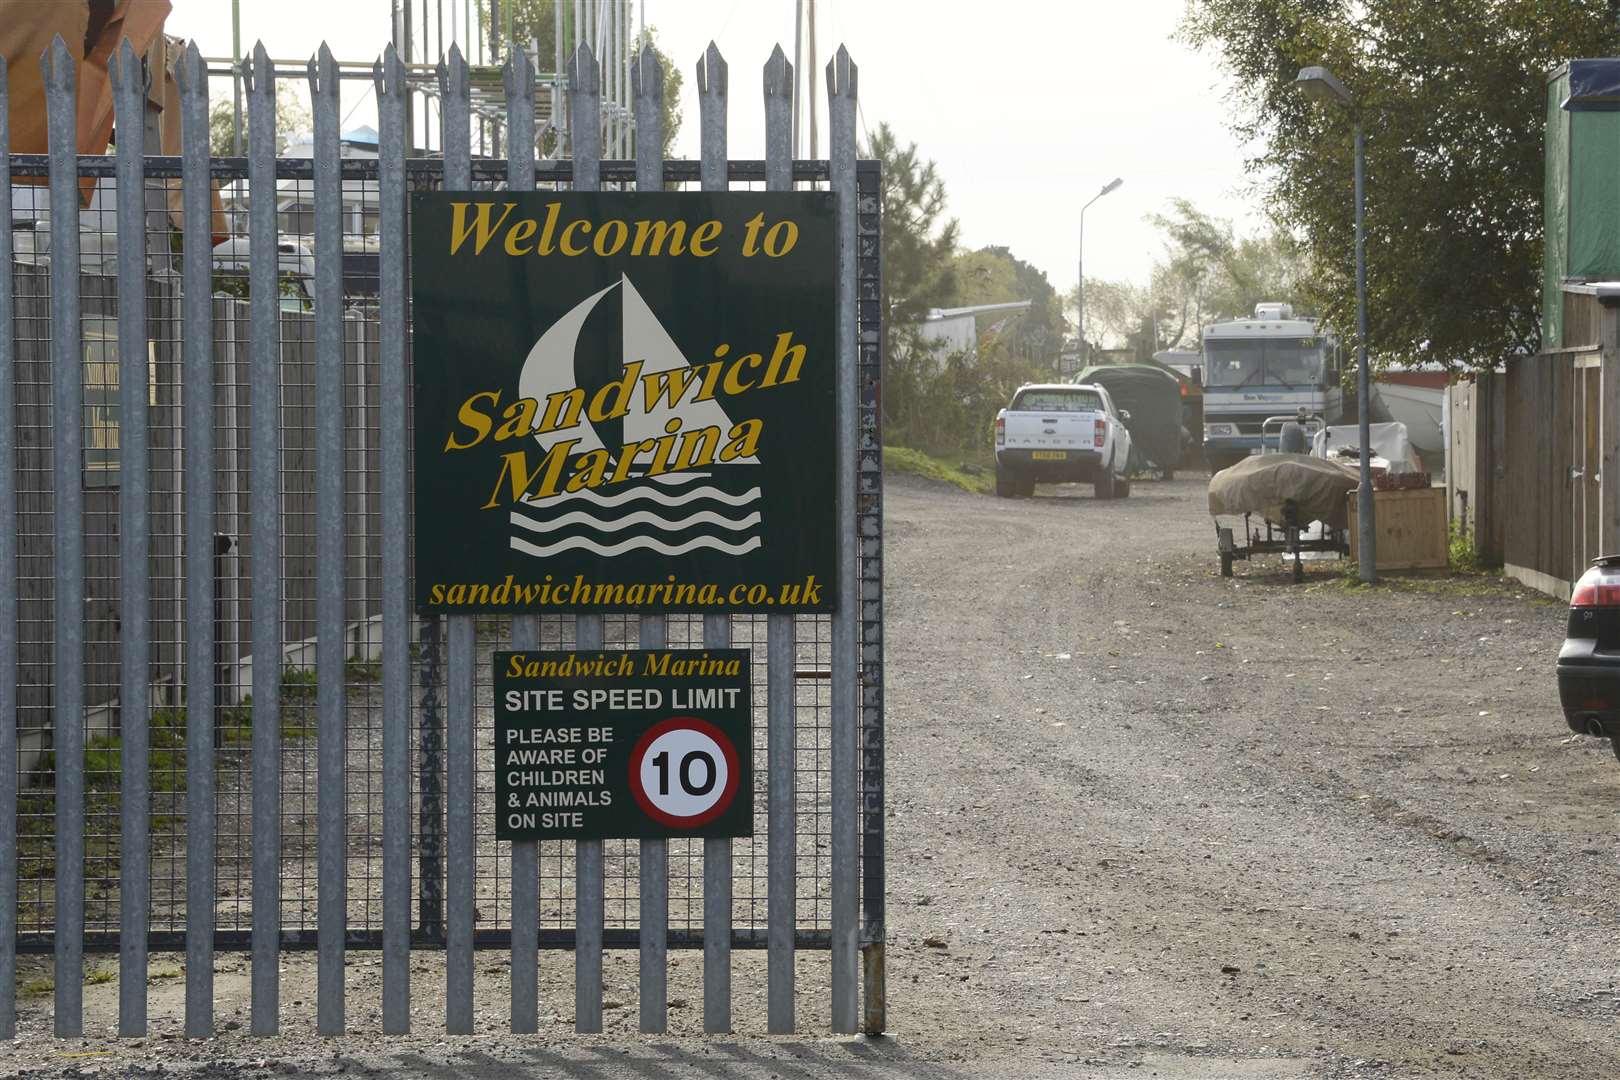 Sandwich Marina, where the shooting took place. Picture: Paul Amos